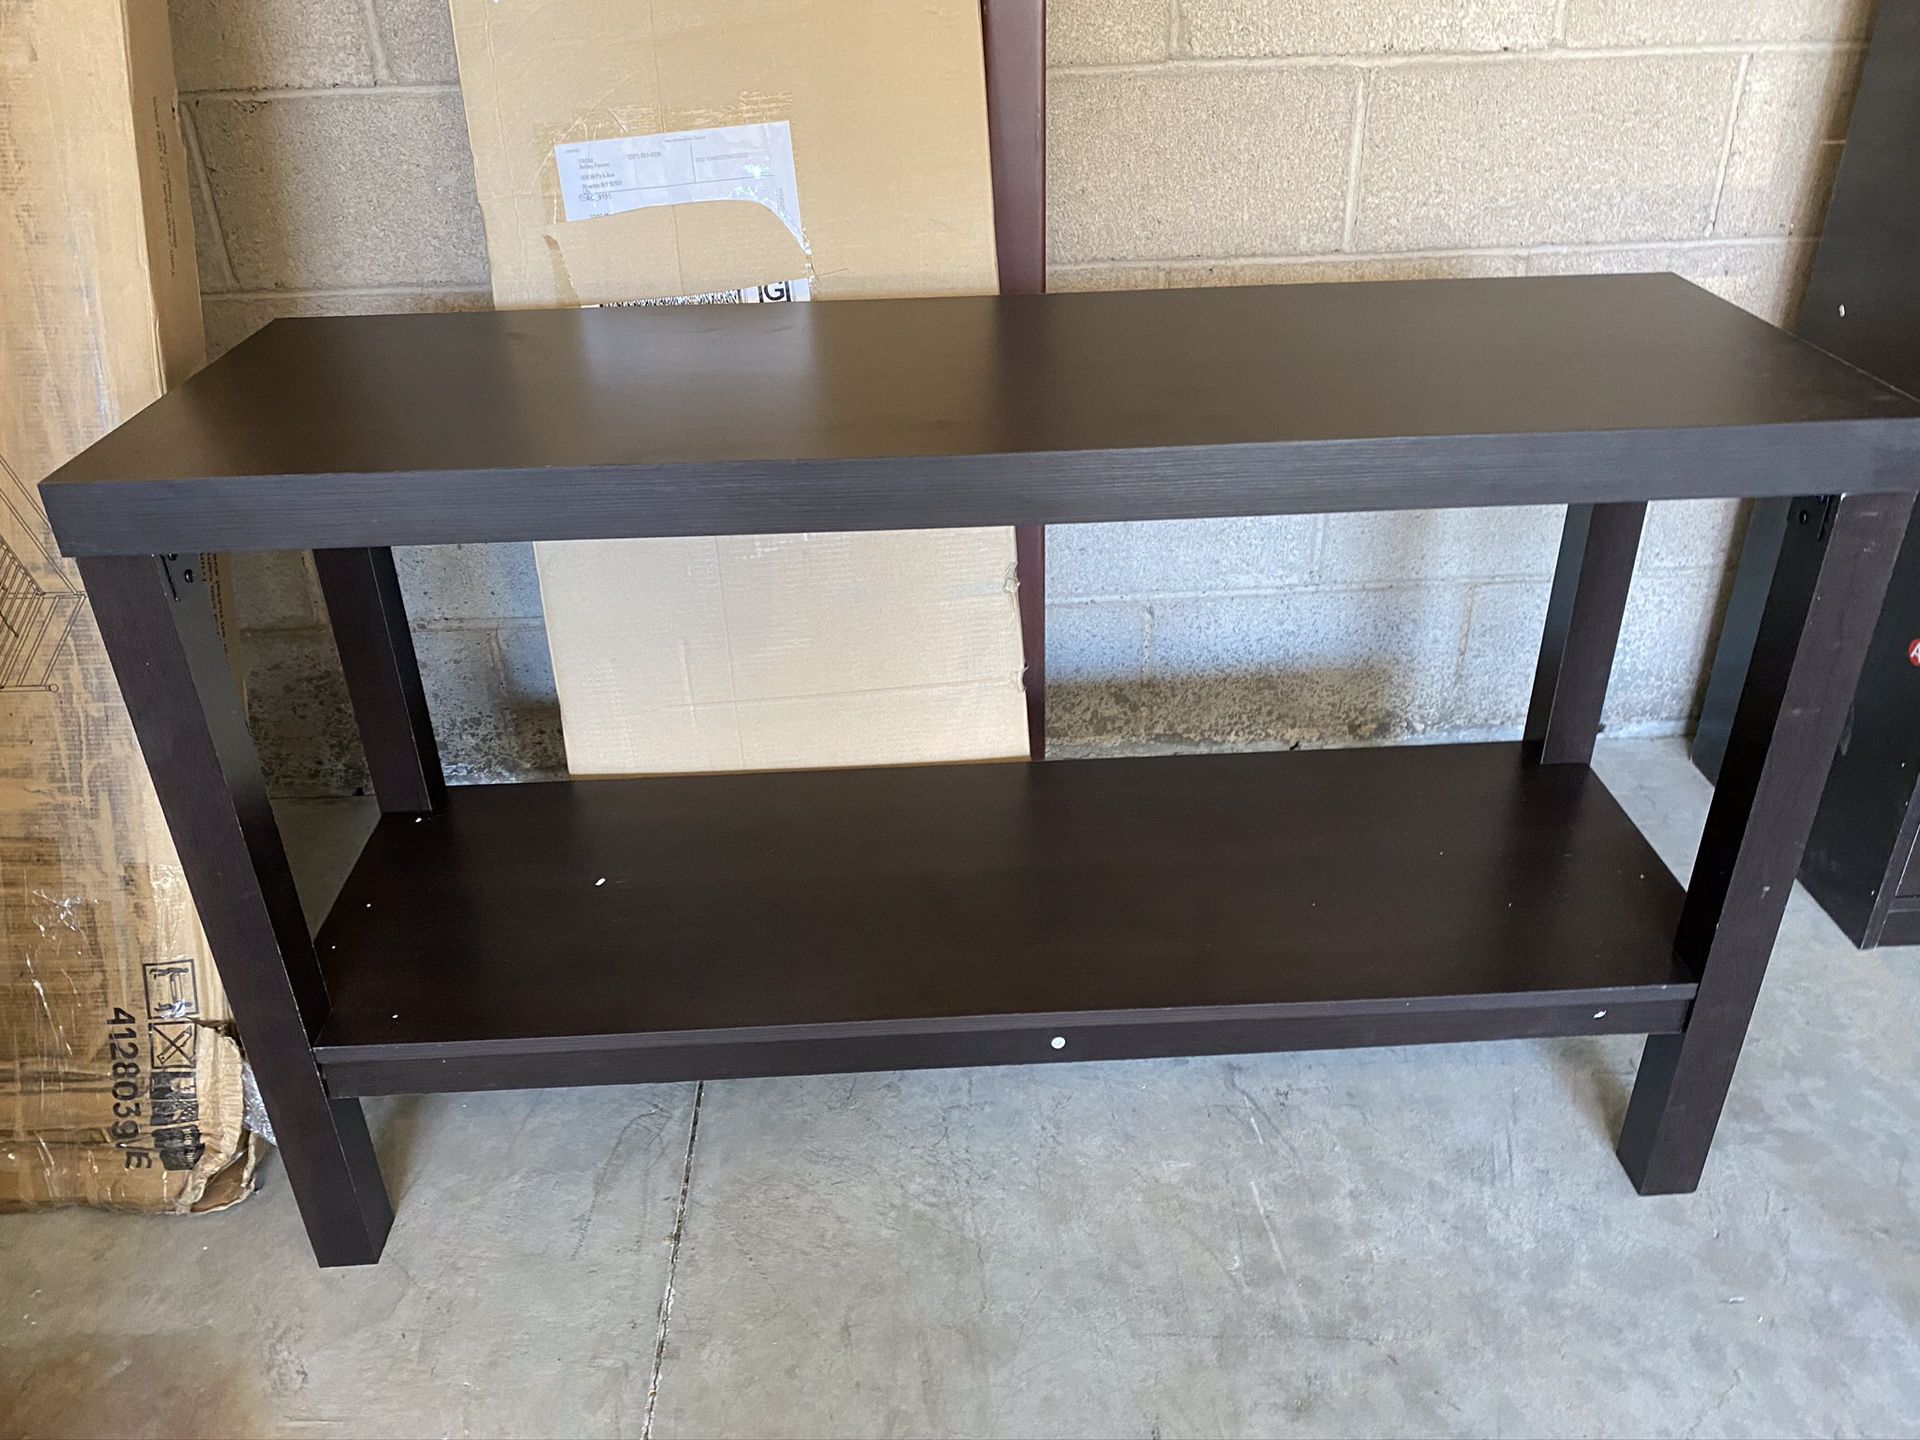 Espresso color console table 48x30x20 new excellent condition just assembled. / price is firm